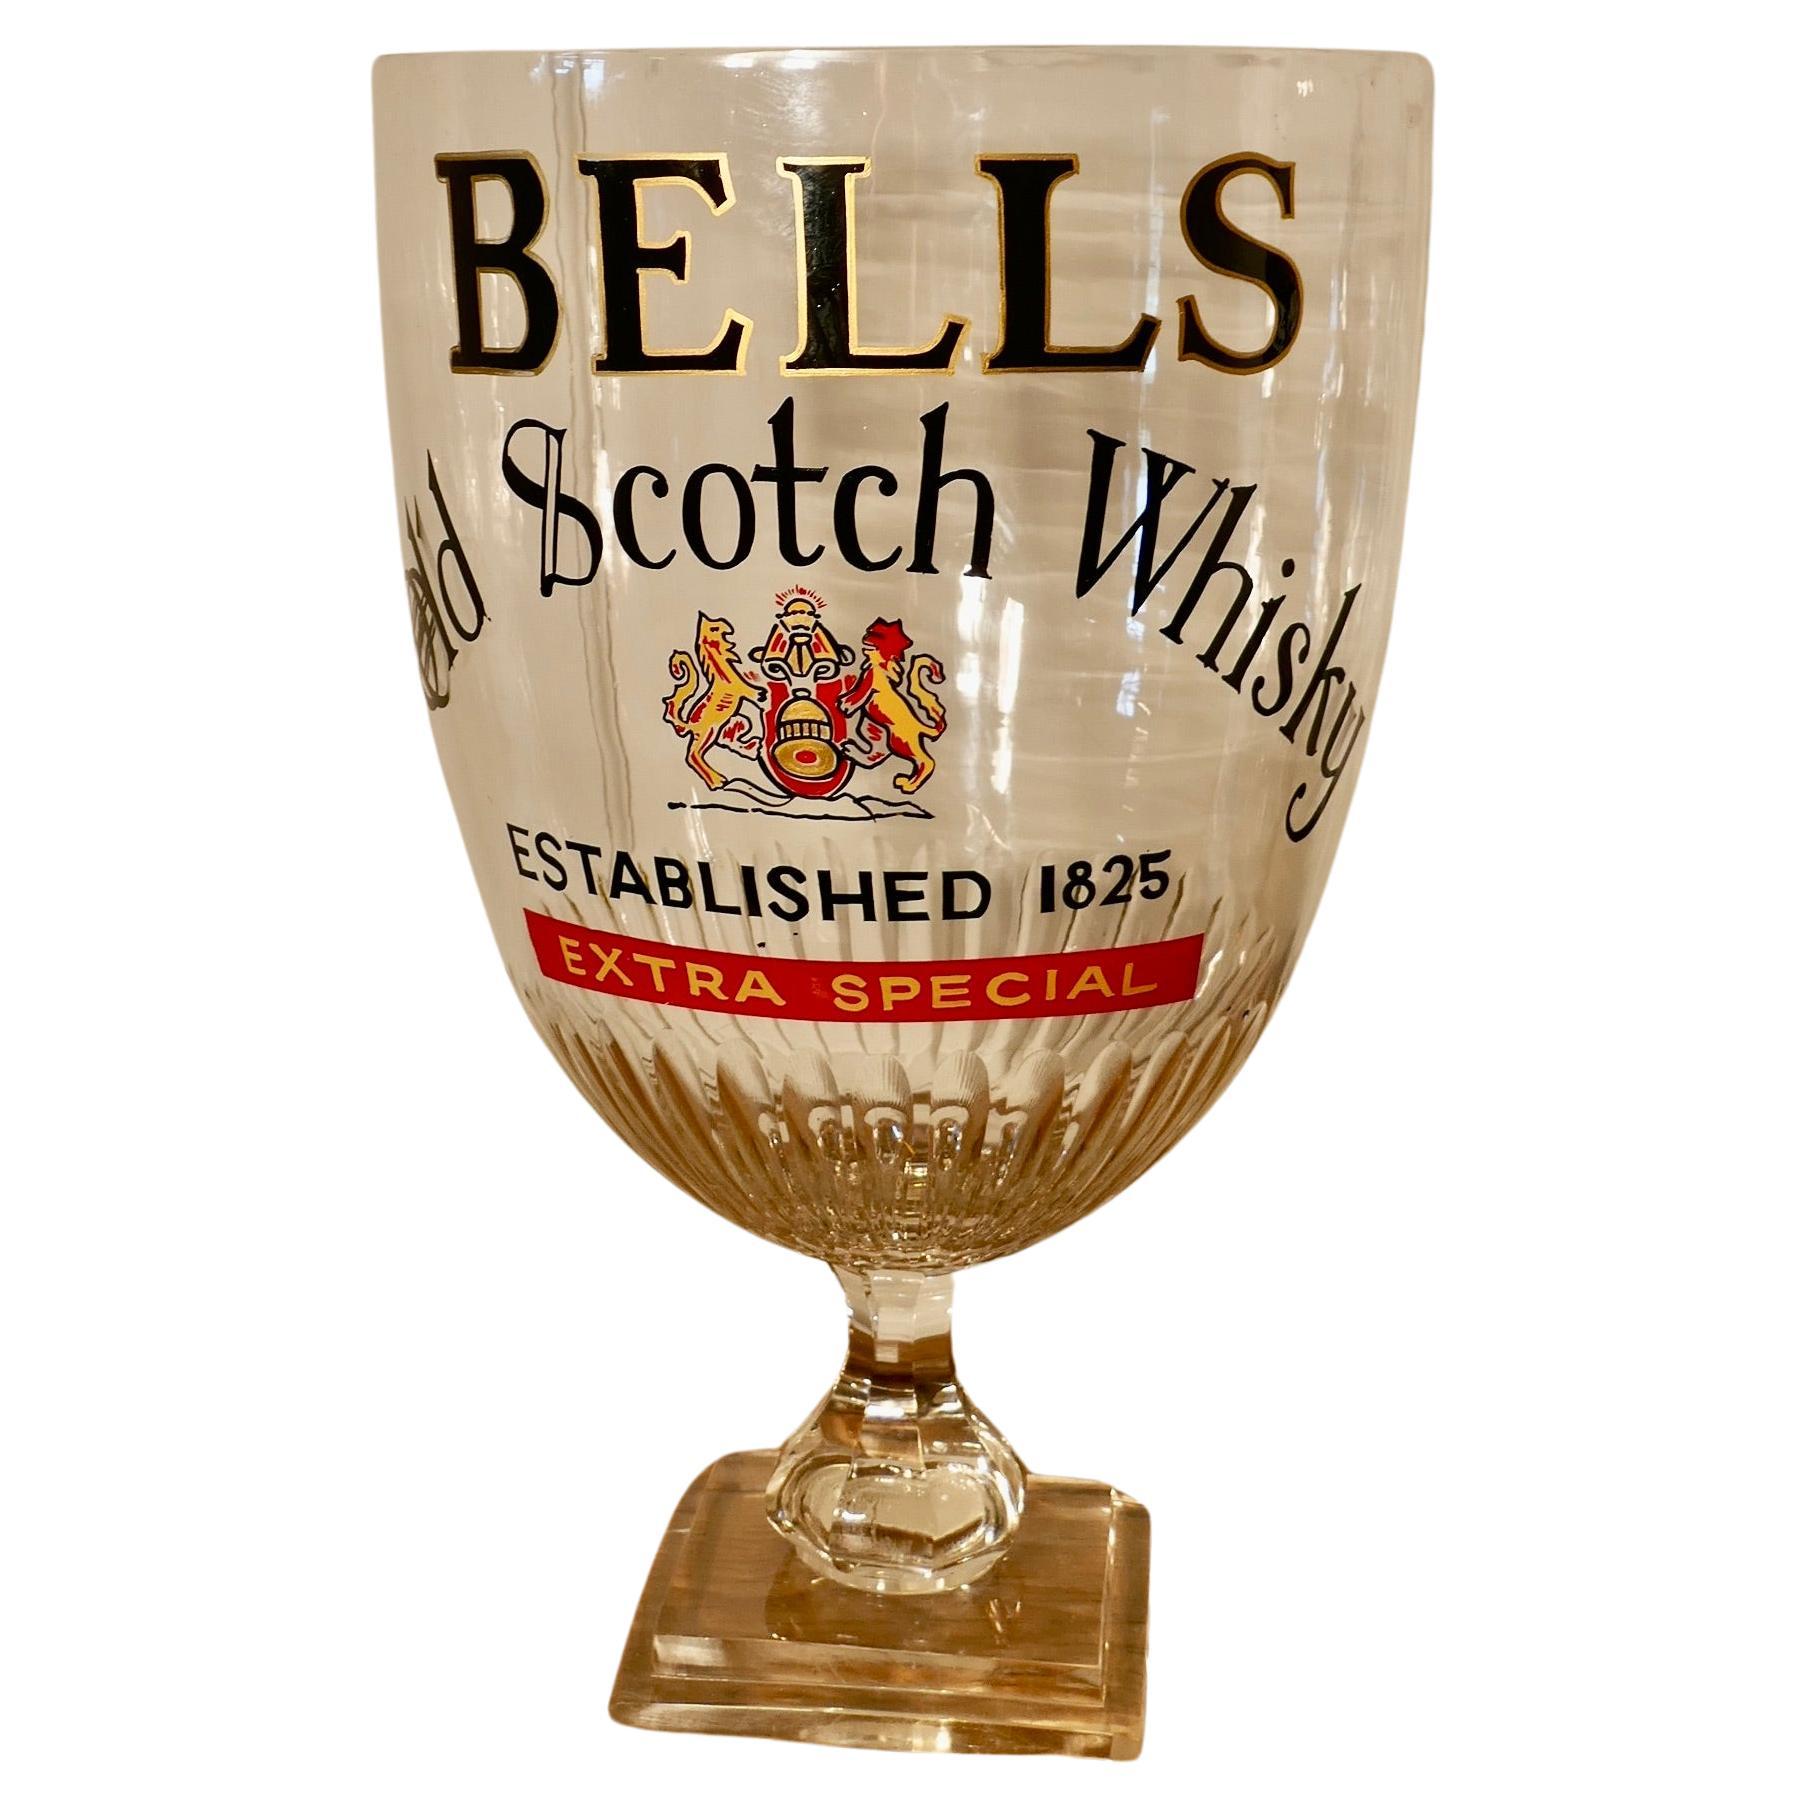 Giant Advertising Presentation Glass Chalice for Bells Scotch Whisky     For Sale